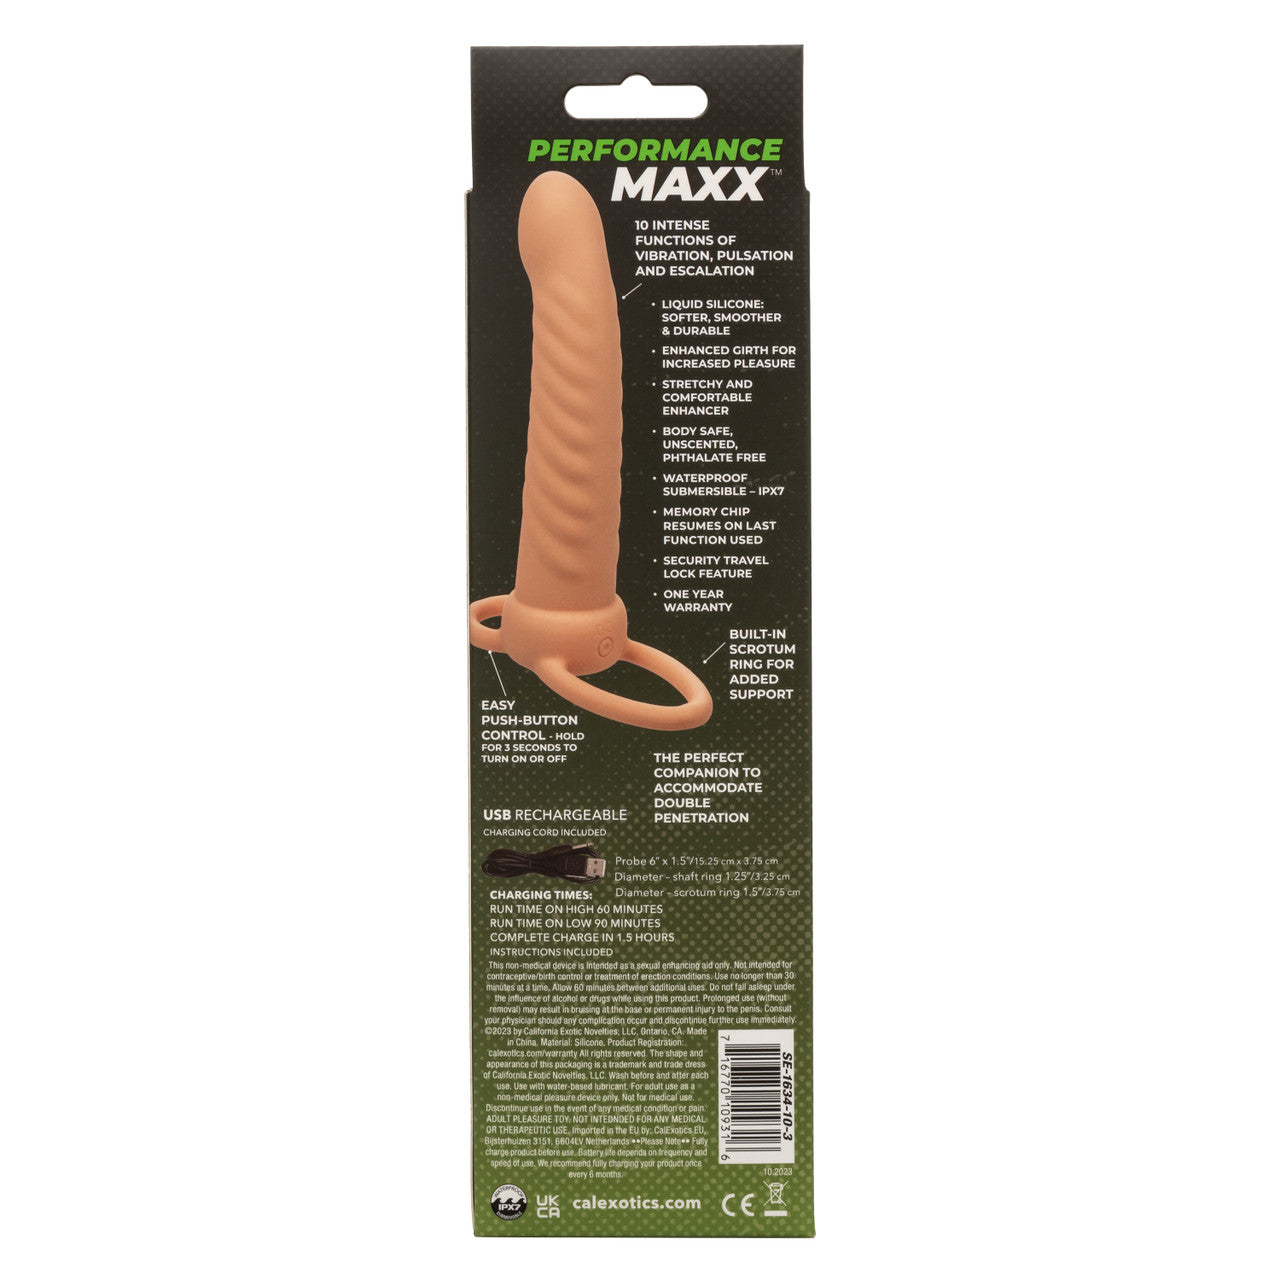 Rechargeable Ribbed Dual Penetrator - Ivory